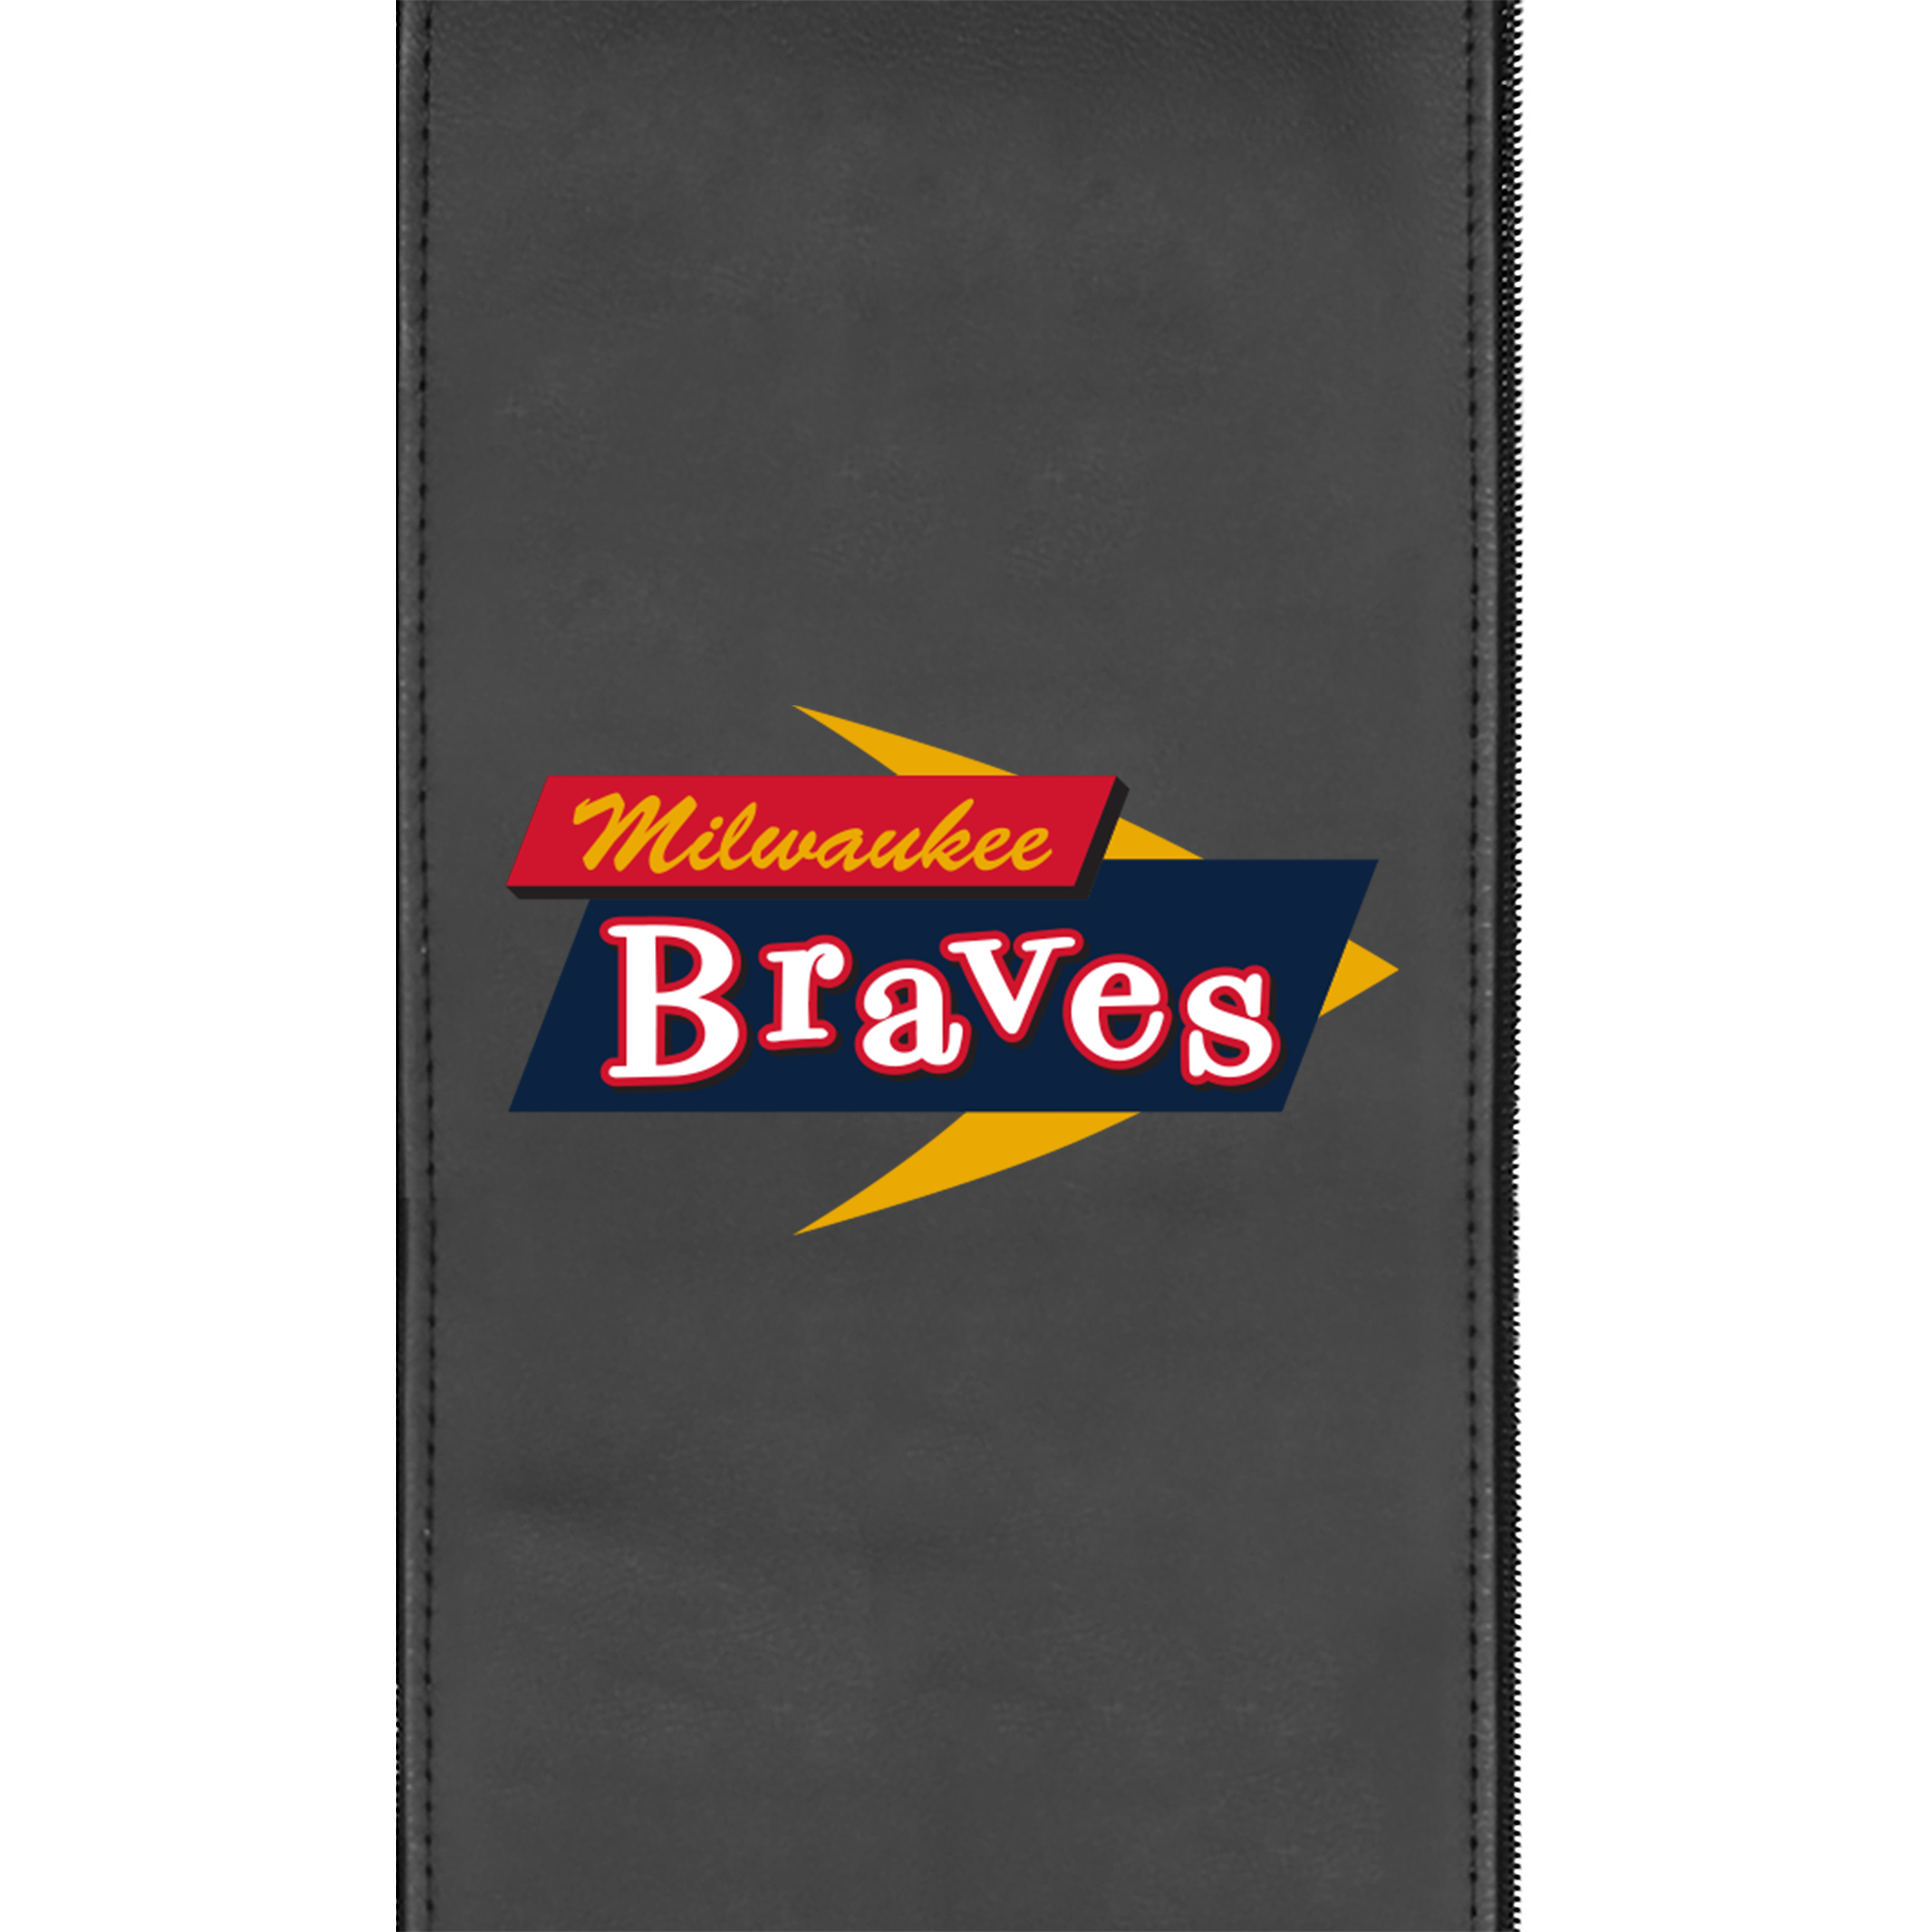 SuiteMax 3.5 VIP Seats with Milwaukee Braves Cooperstown Secondary Logo